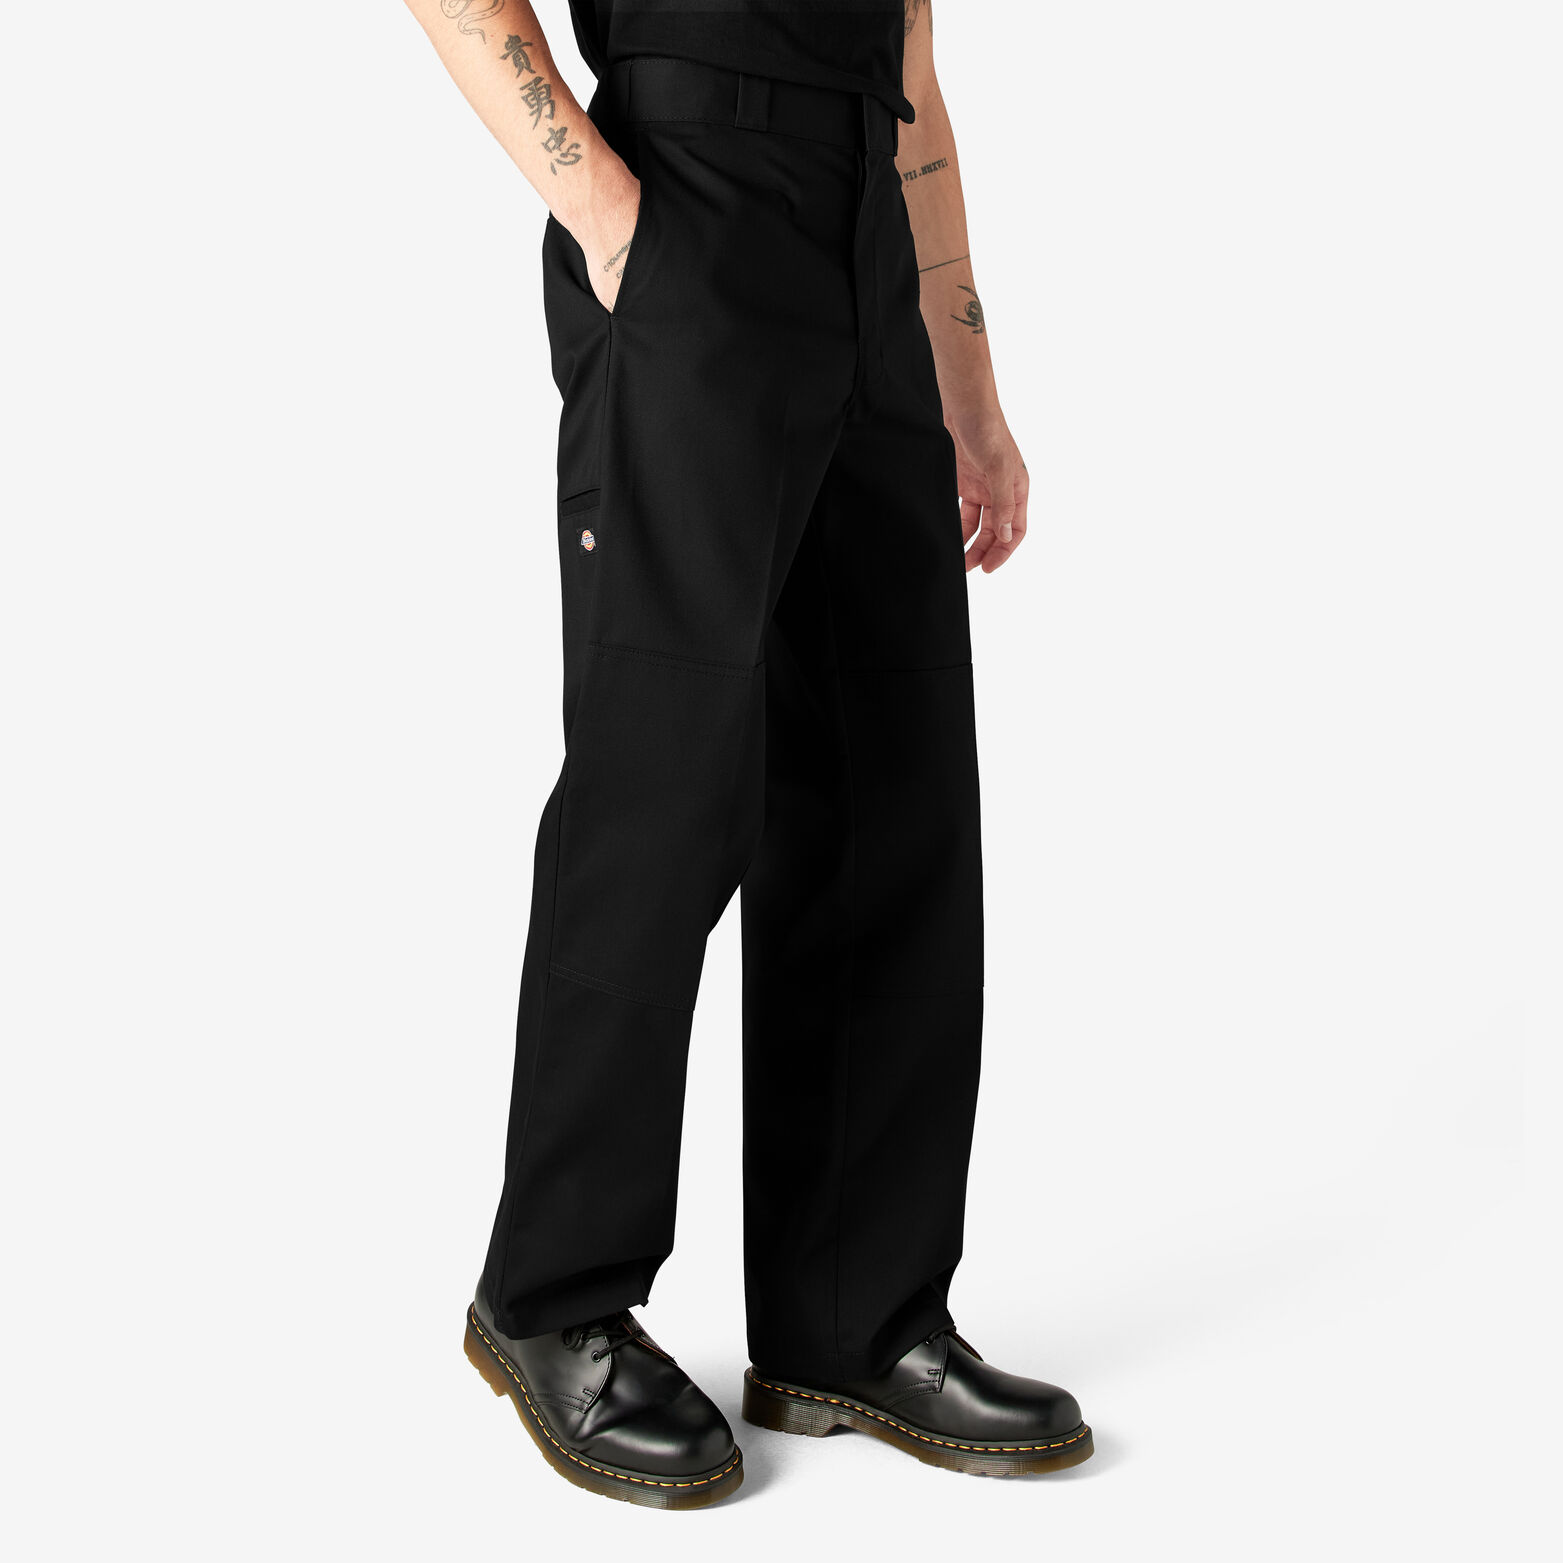 Mens DICKIES 85283 Loose Fit Double Knee Work Uniform Pants NWT Many Colors